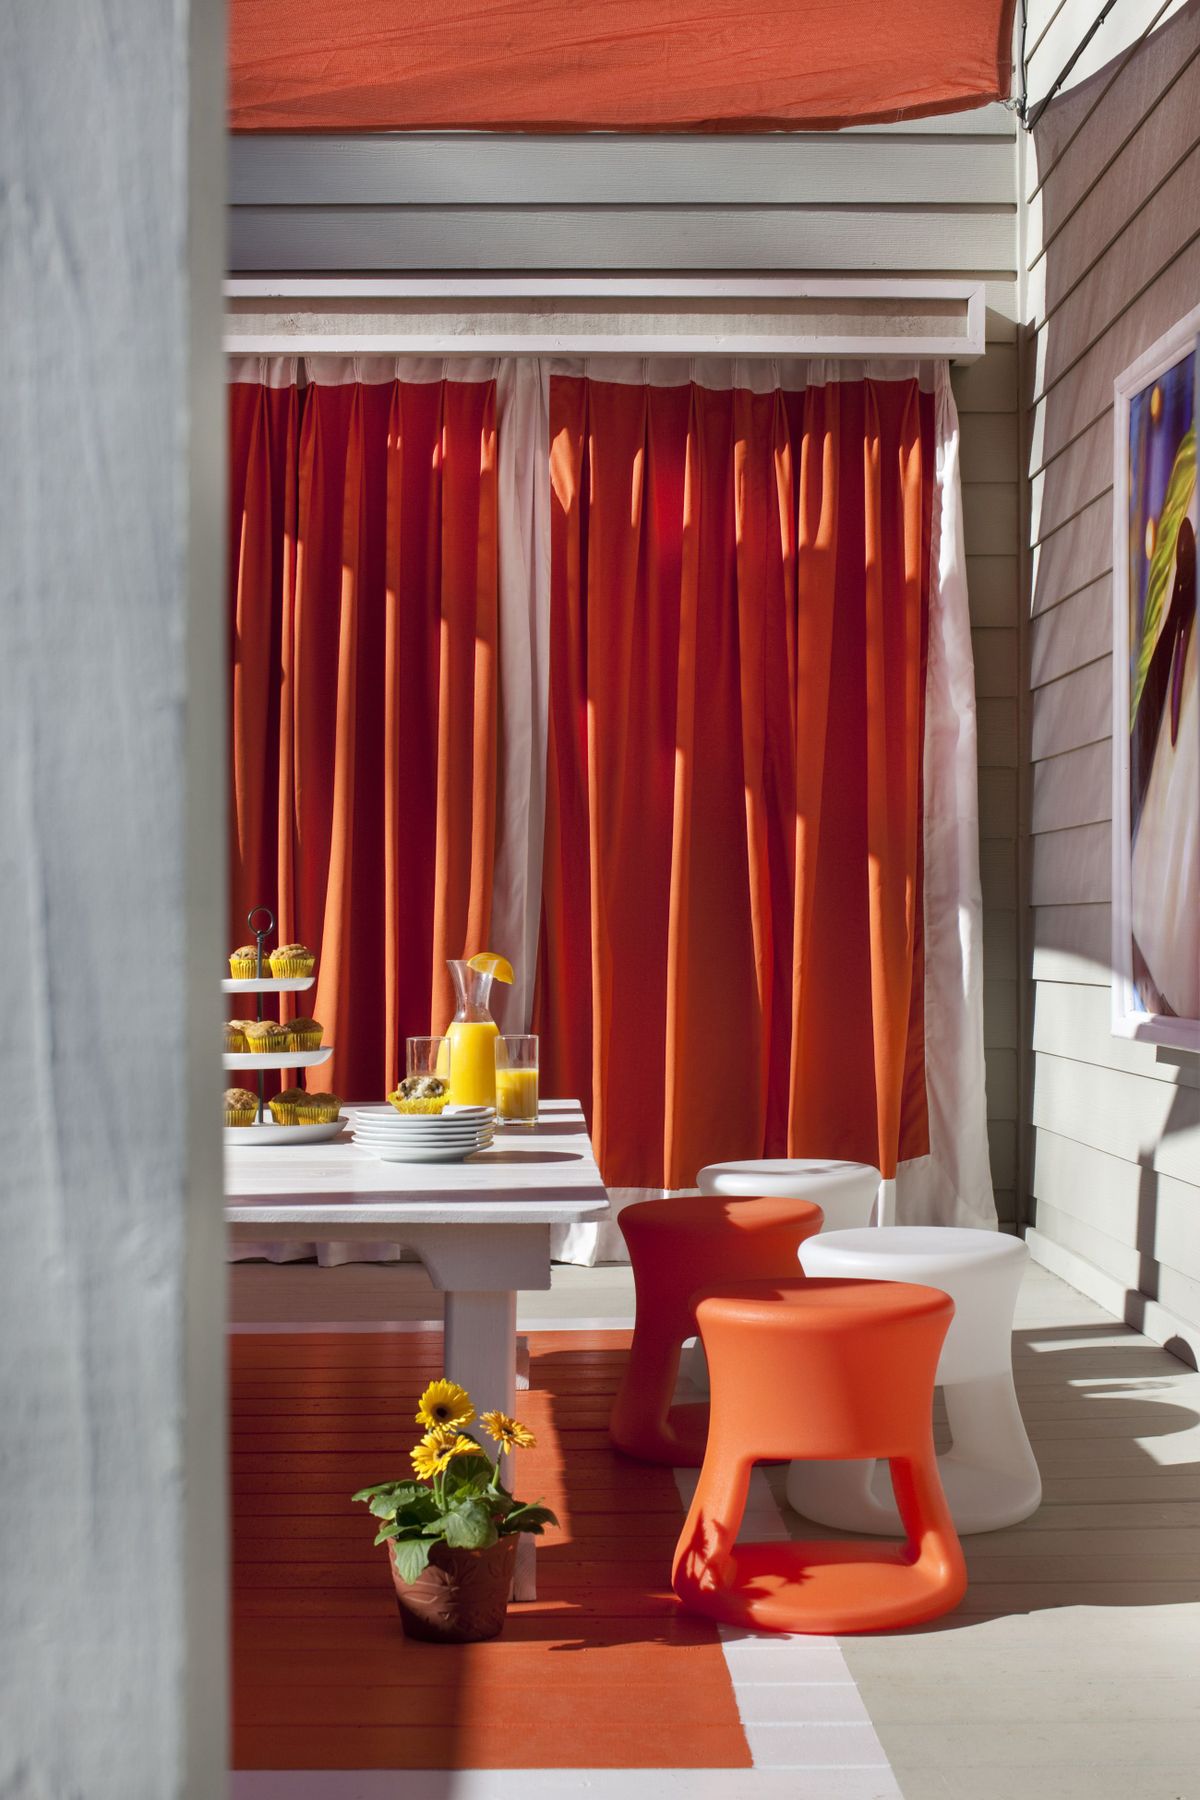 This space, also designed by Dennis Patrick Flynn, includes outdoor curtains to create privacy, bold color to add energy and a low-to-the-ground table for eight. (The Spokesman-Review)